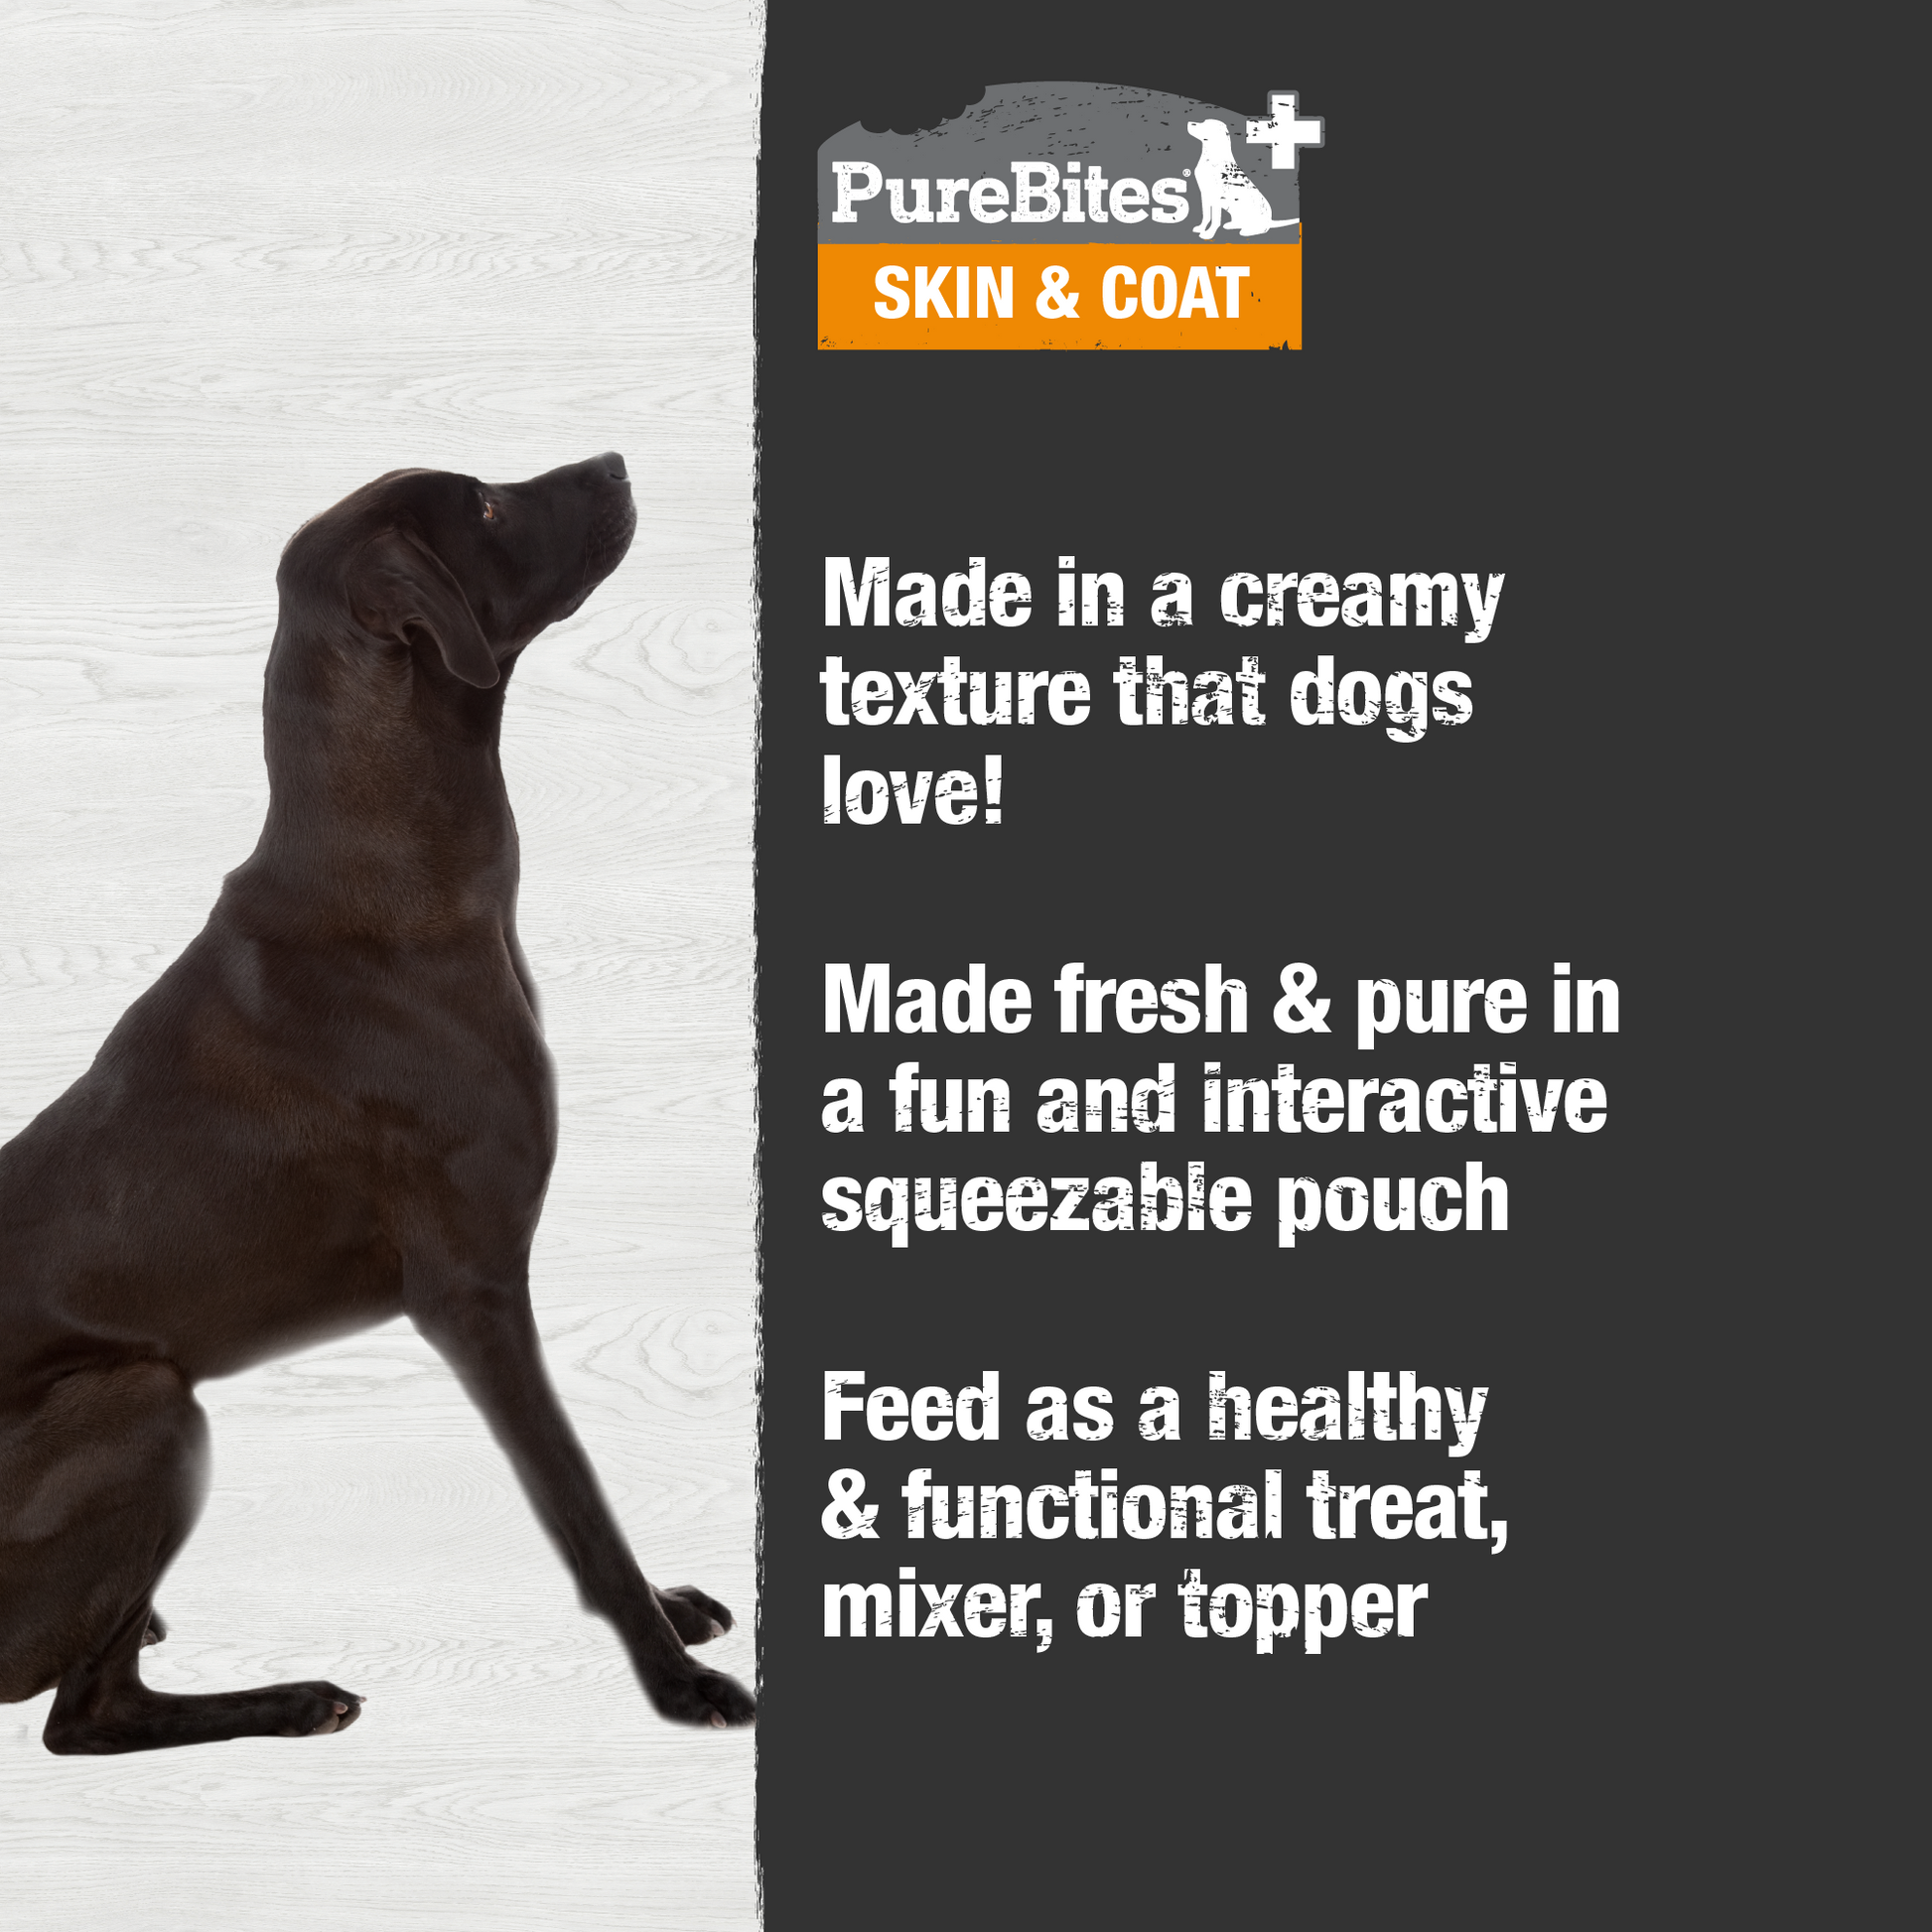 Made fresh & pure in a creamy texture and in a fun and interactive squeezable pouch, locking in the taste dogs crave and superior nutrition that pet parents love